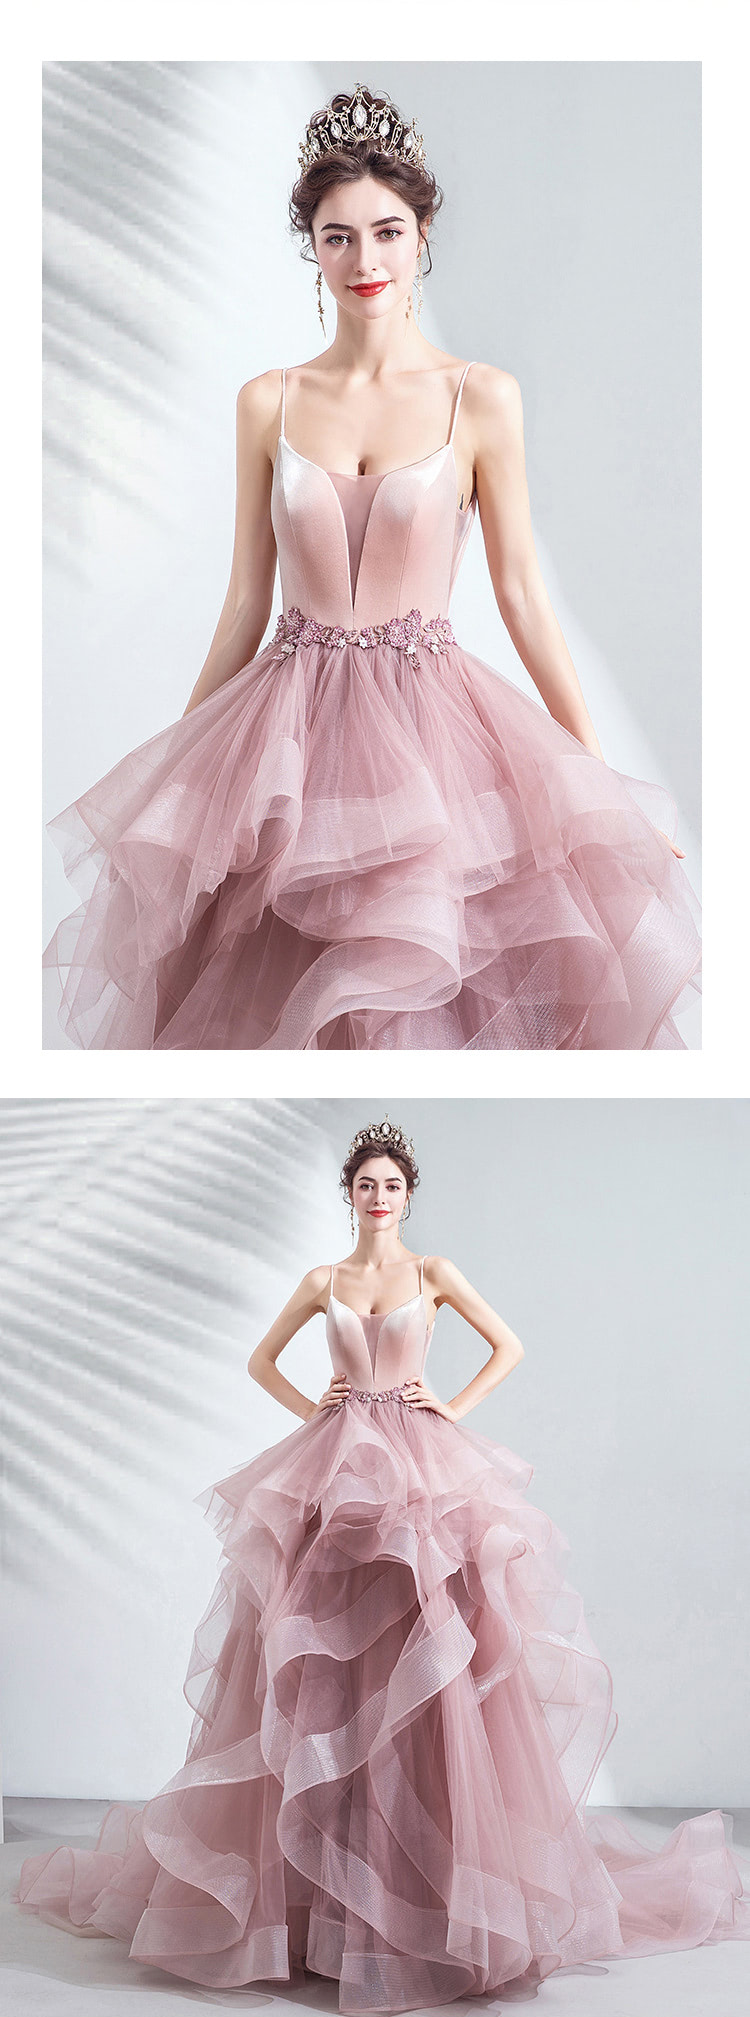 Pink-Layered-Tulle-Banquet-Prom-Party-Evening-Pompon-Skirt-Dress12